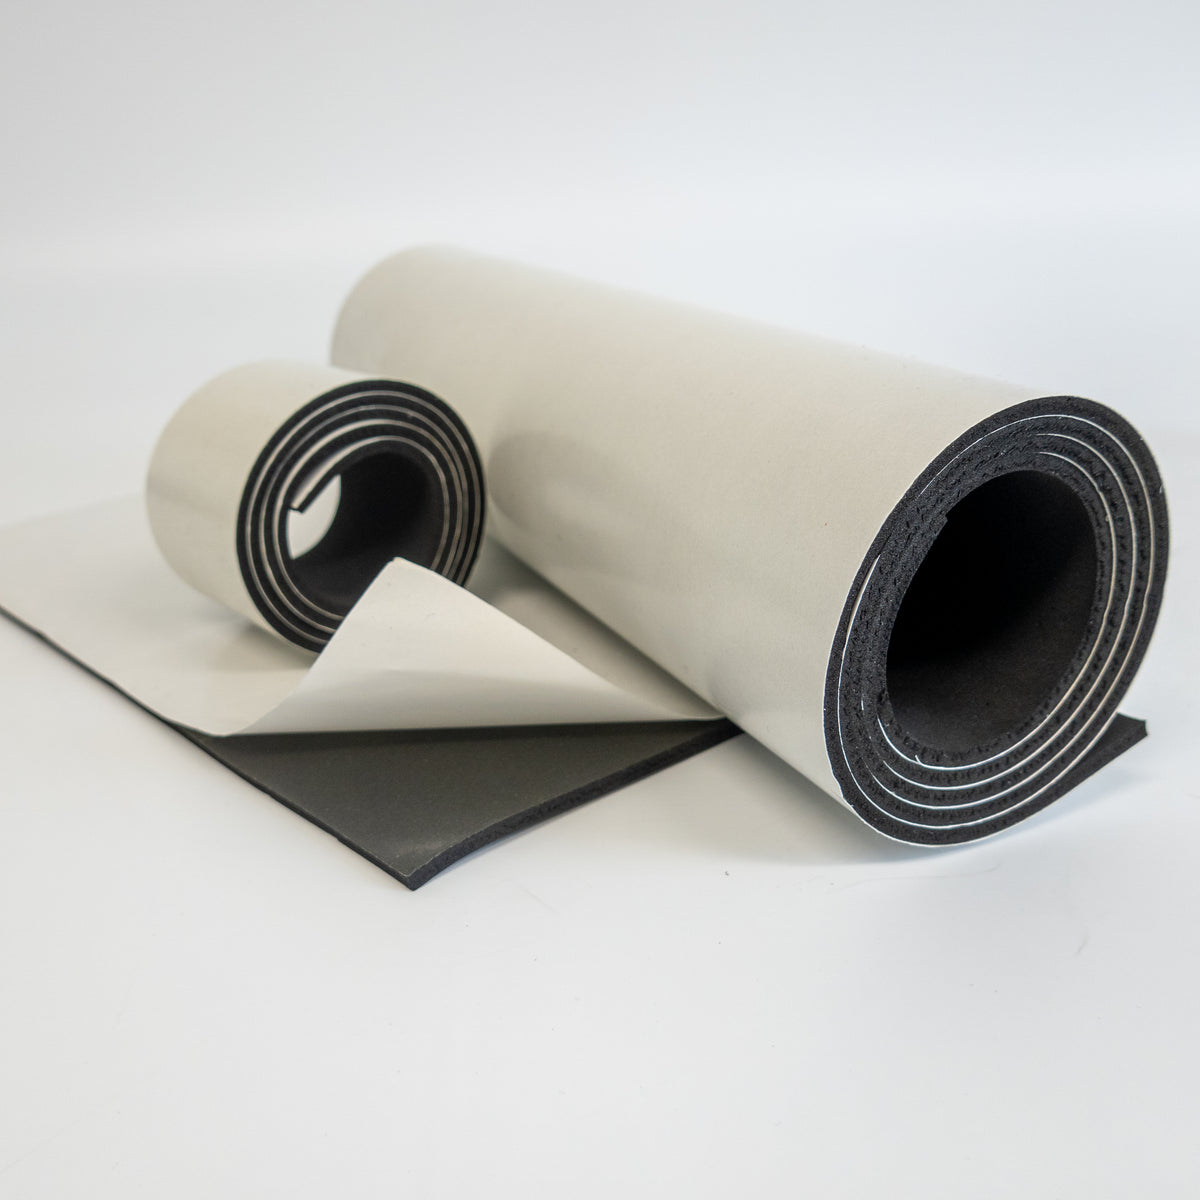 White Polyethylene Closed Cell Foam Strip Roll with Adhesive on